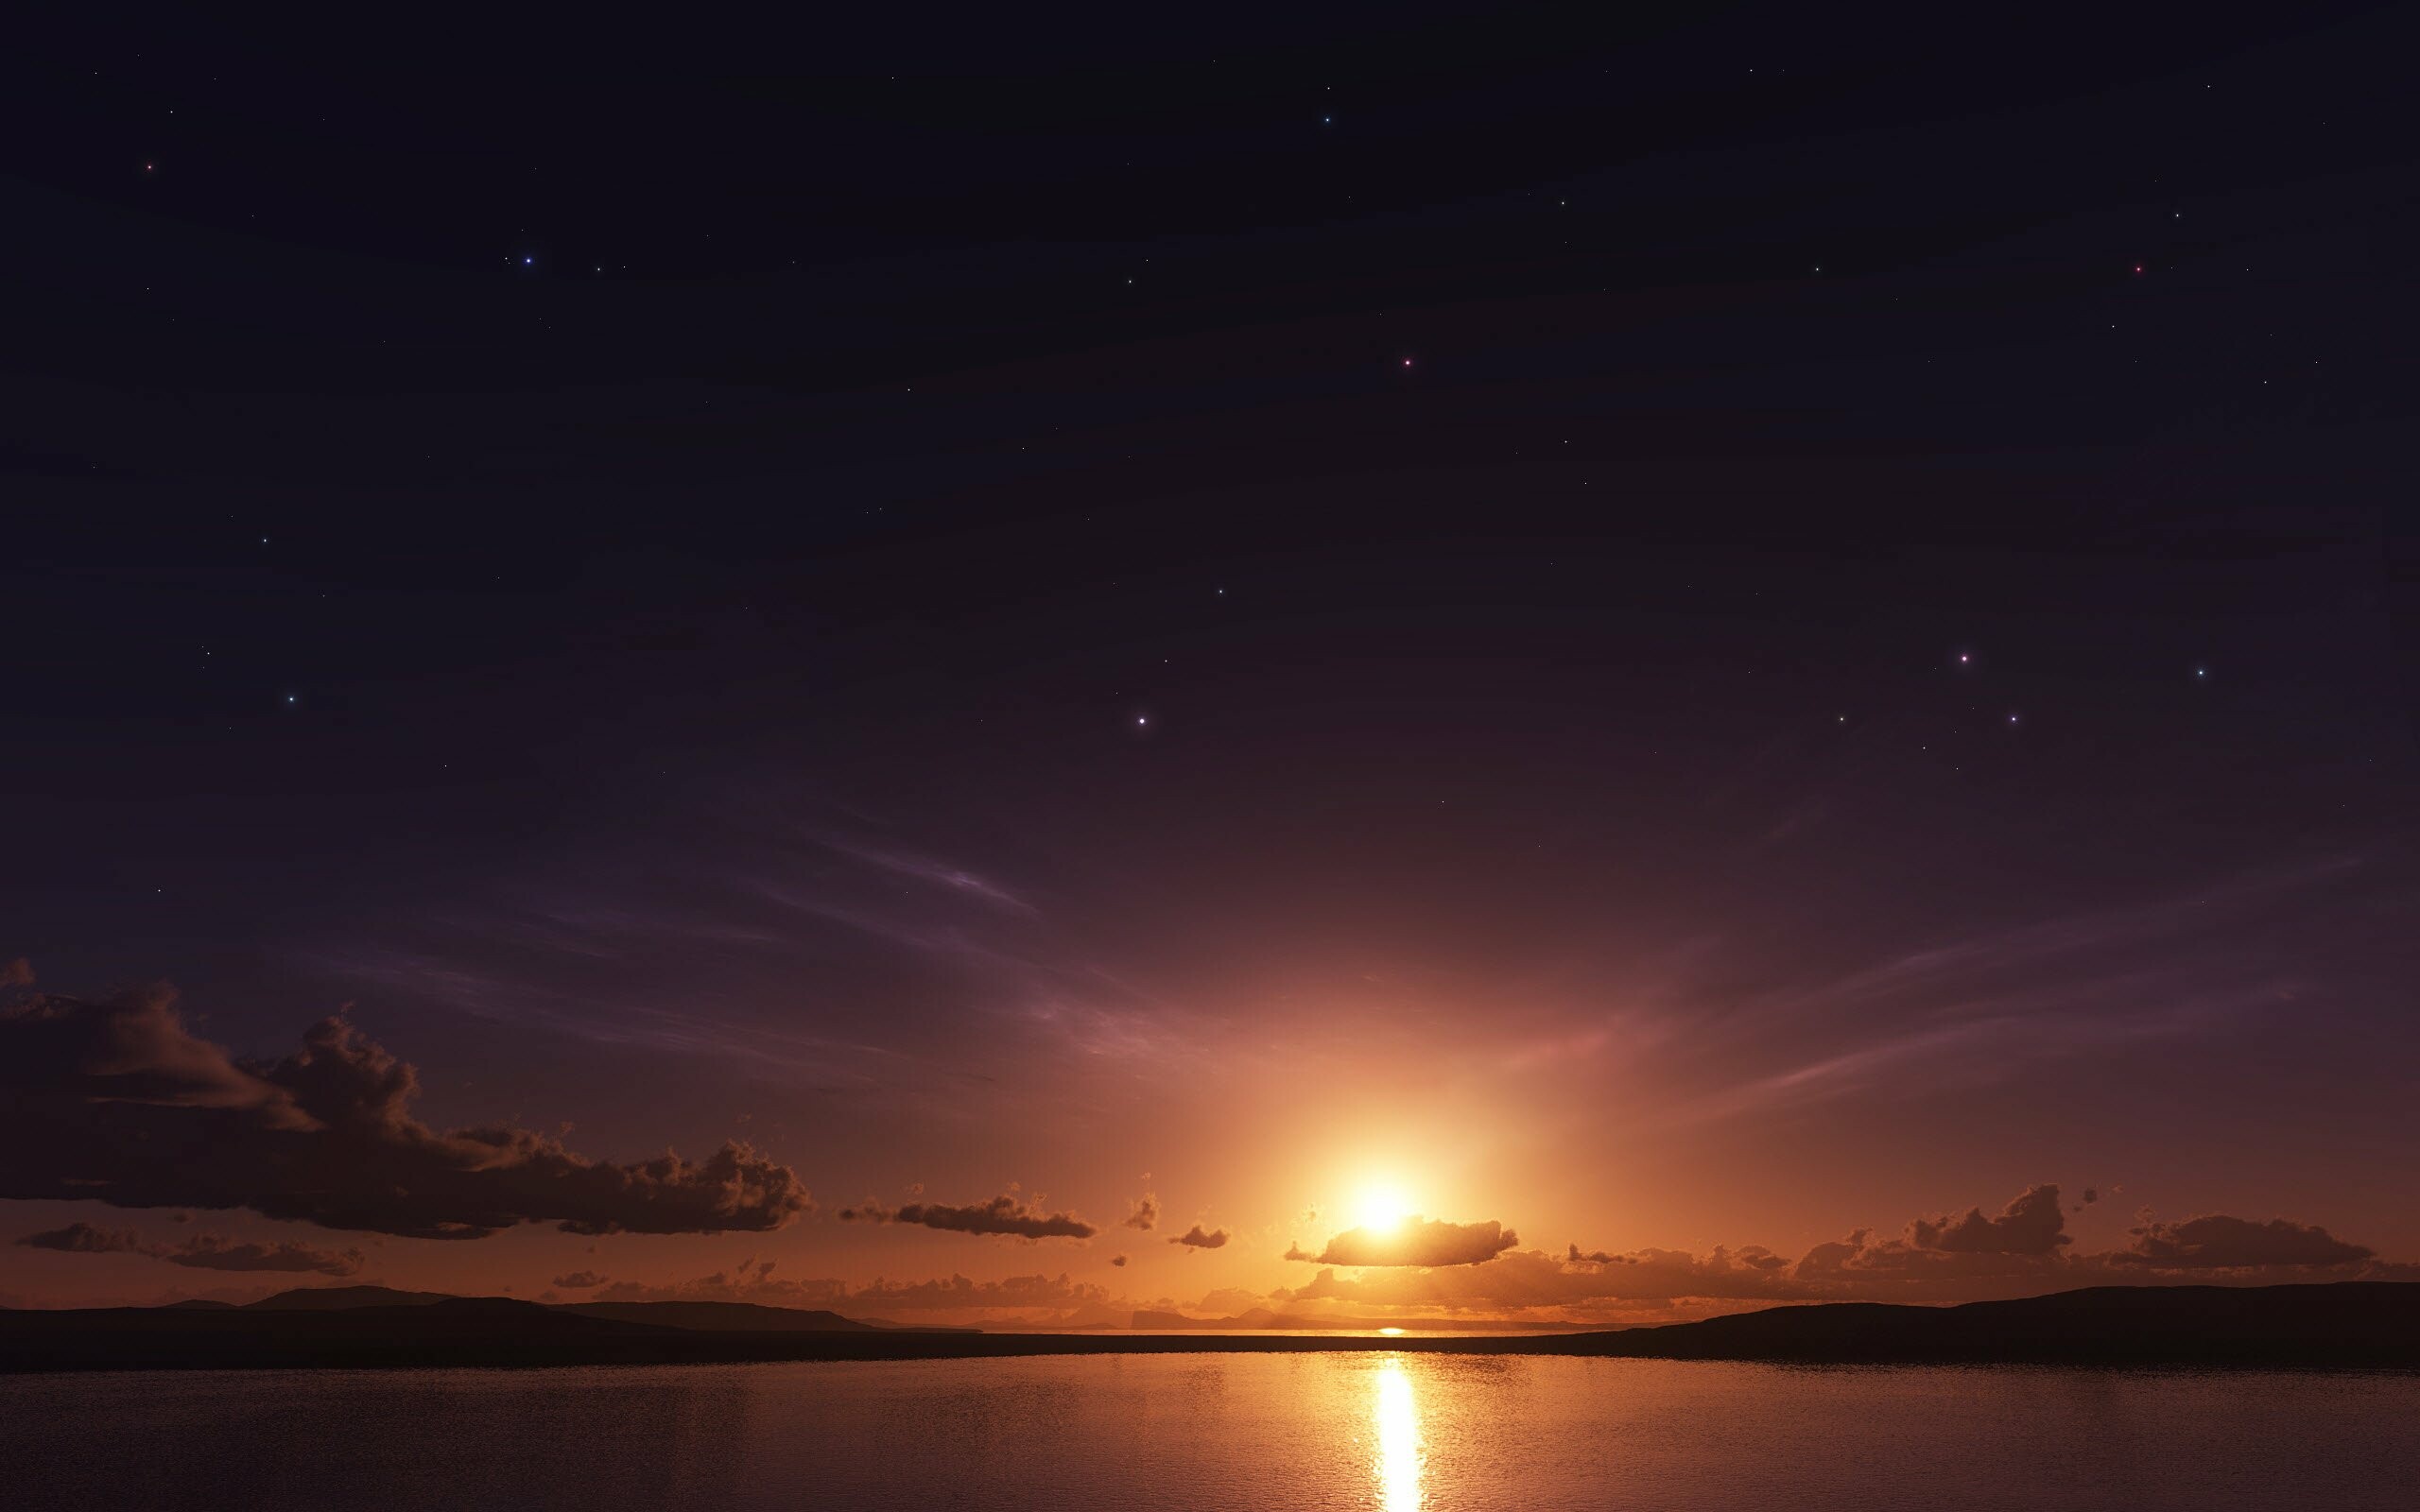 Sunset: The daily disappearance of the Sun below the horizon due to Earth's rotation, Predusk. 2560x1600 HD Wallpaper.